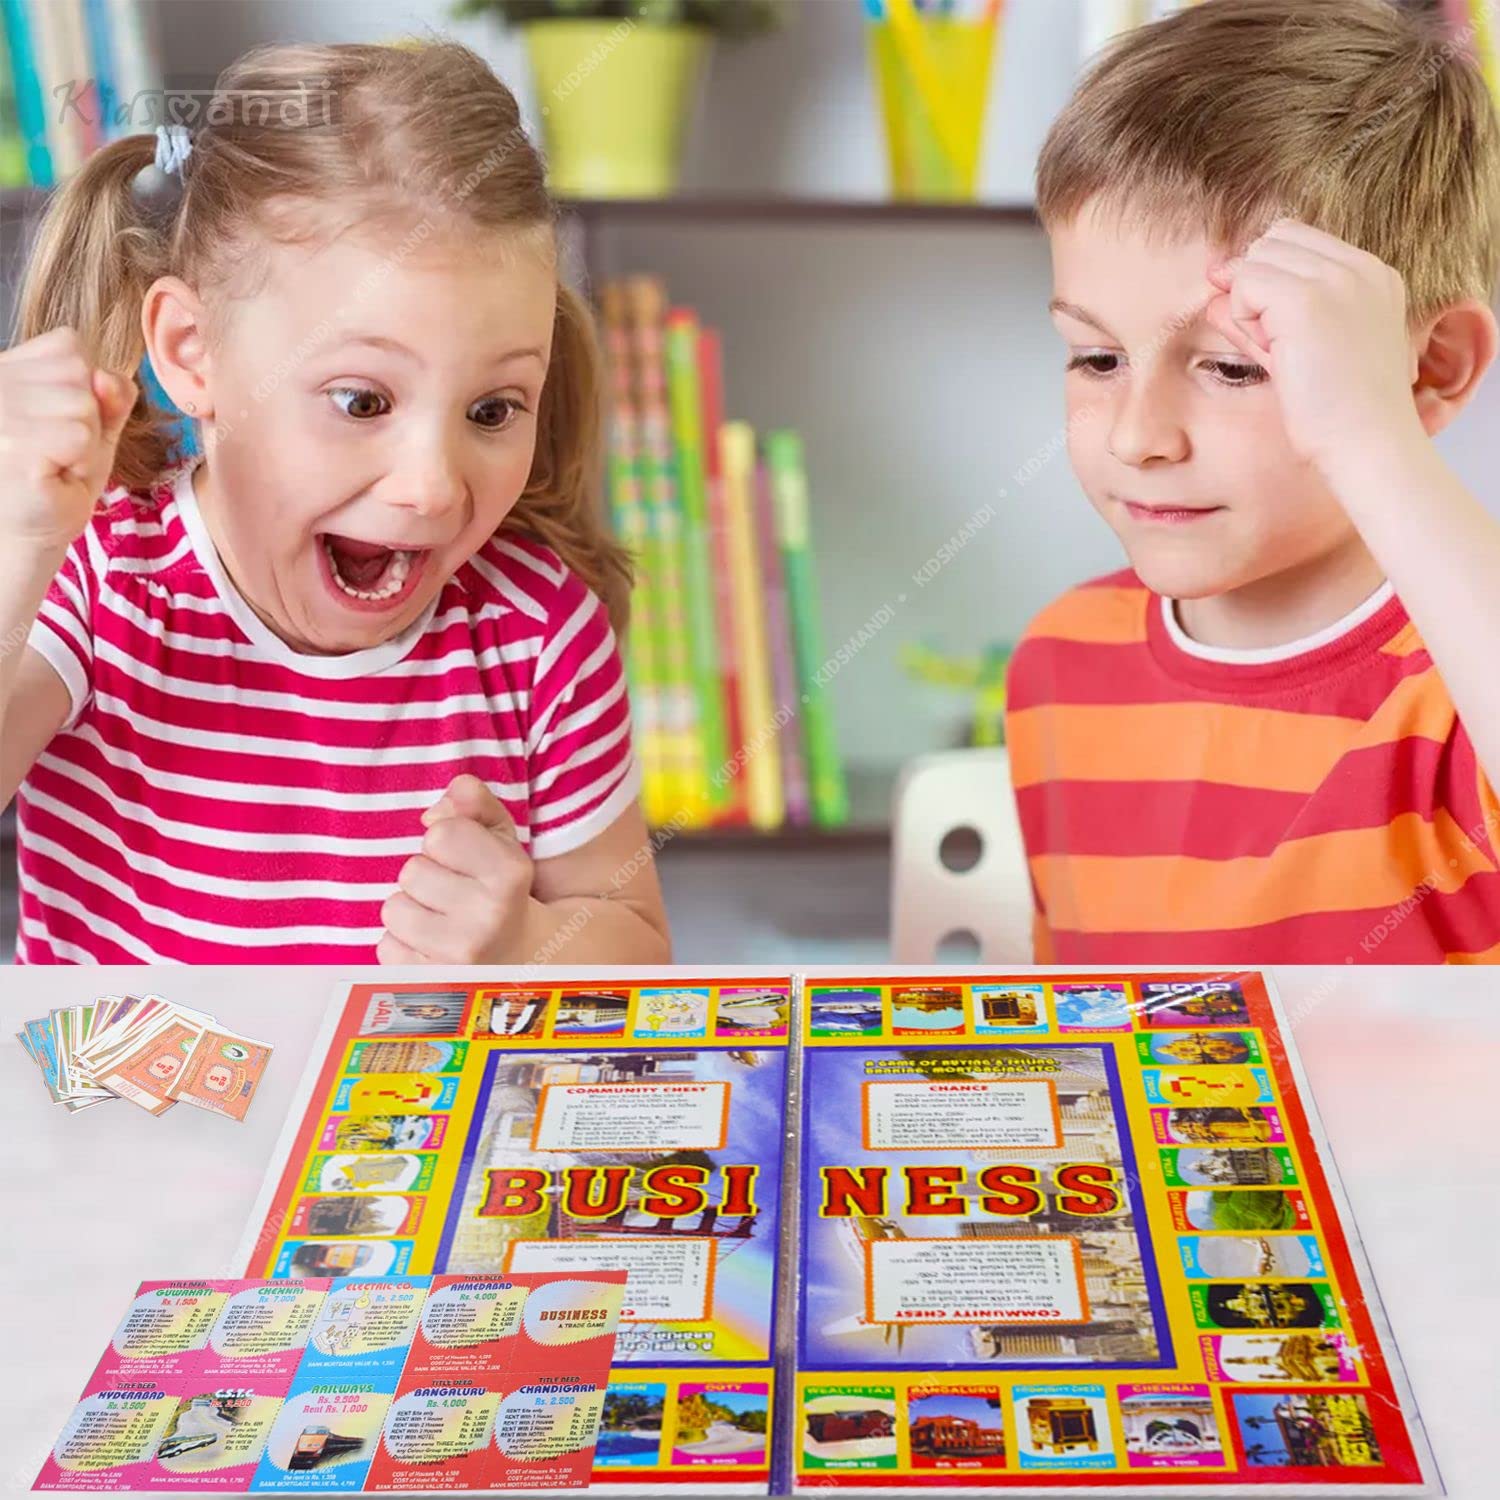 Kids Mandi 3-in-1 Family Board Game, Ludo, Snake and Ladder, Business Trade Games Set